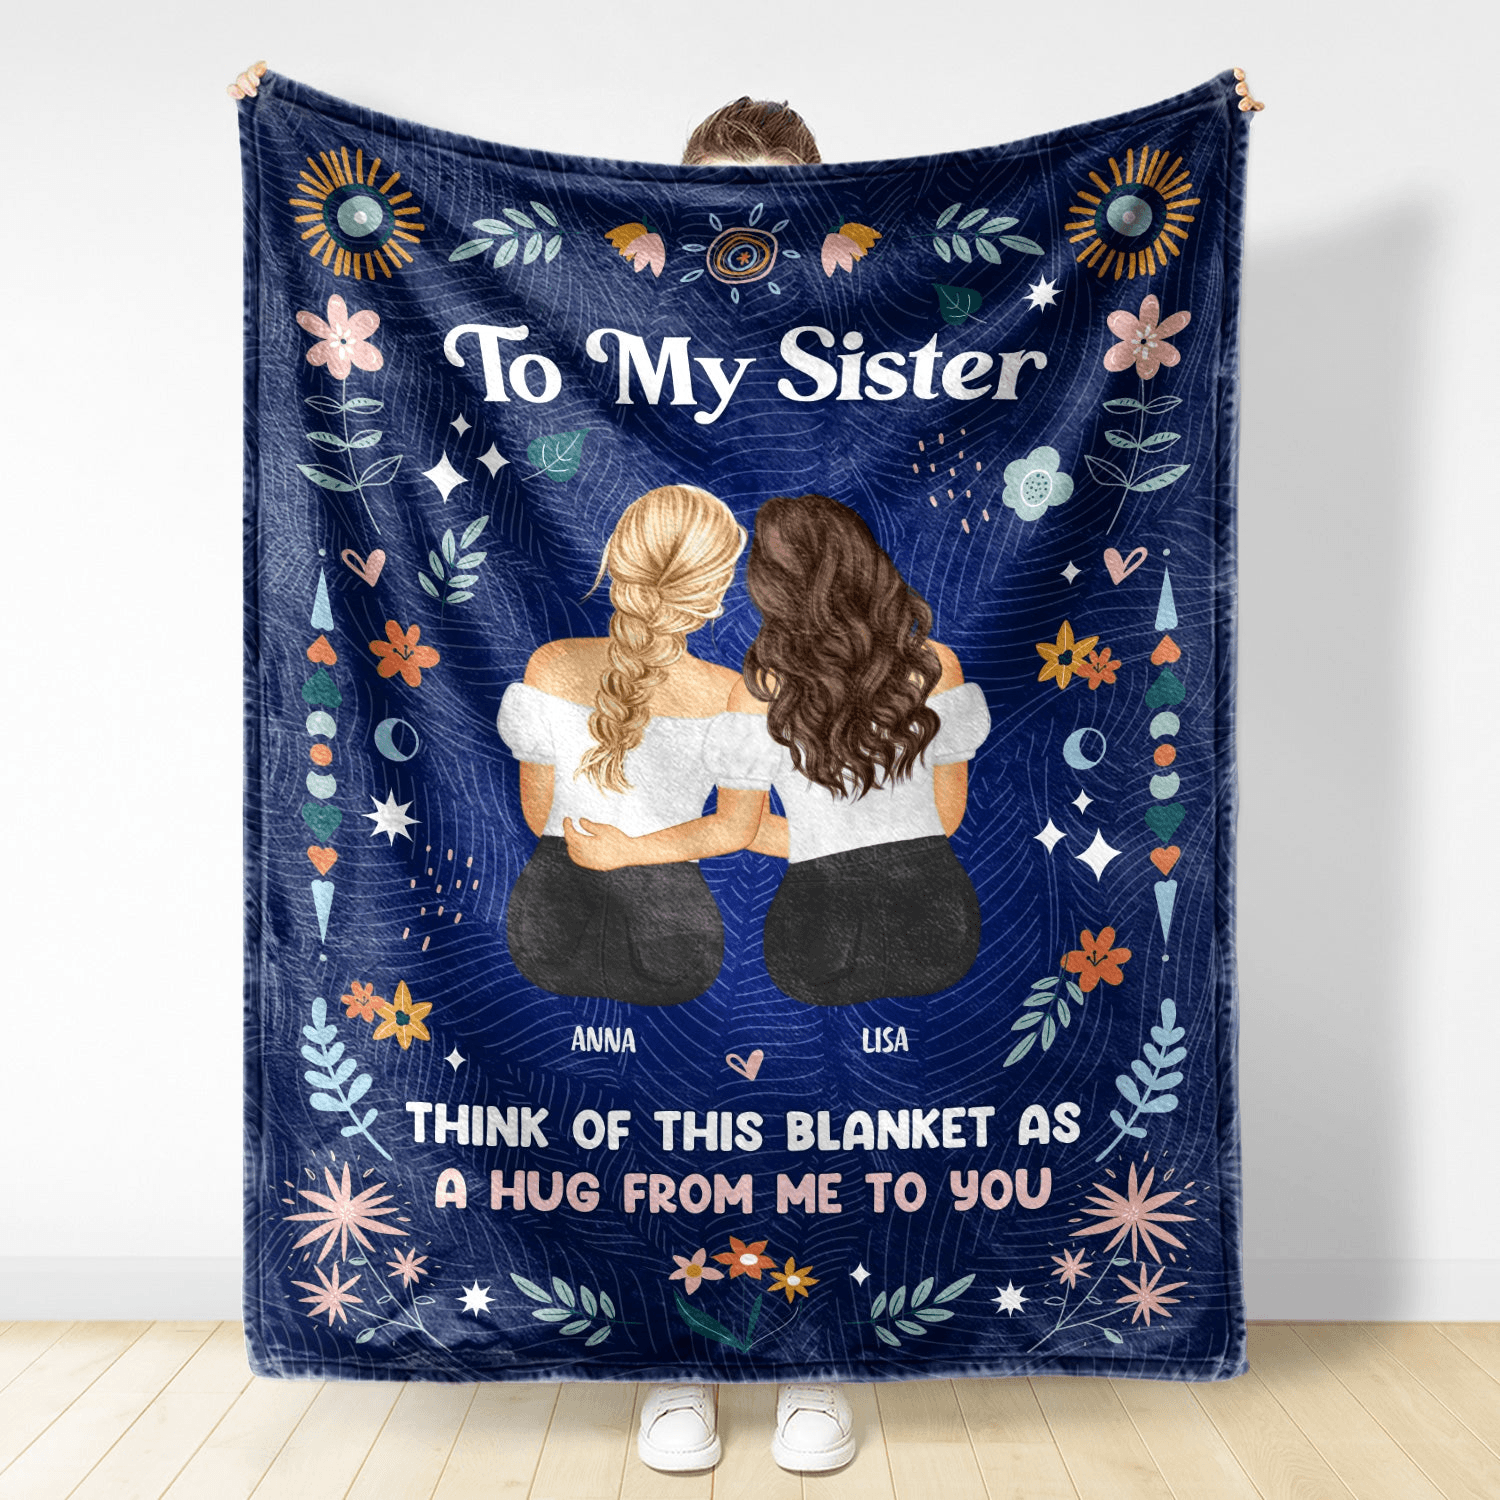 Think Of This Blanket As A Hug - Personalized Custom Blanket - Gift For Her, Besties, Friends, Sister, Soul Sisters